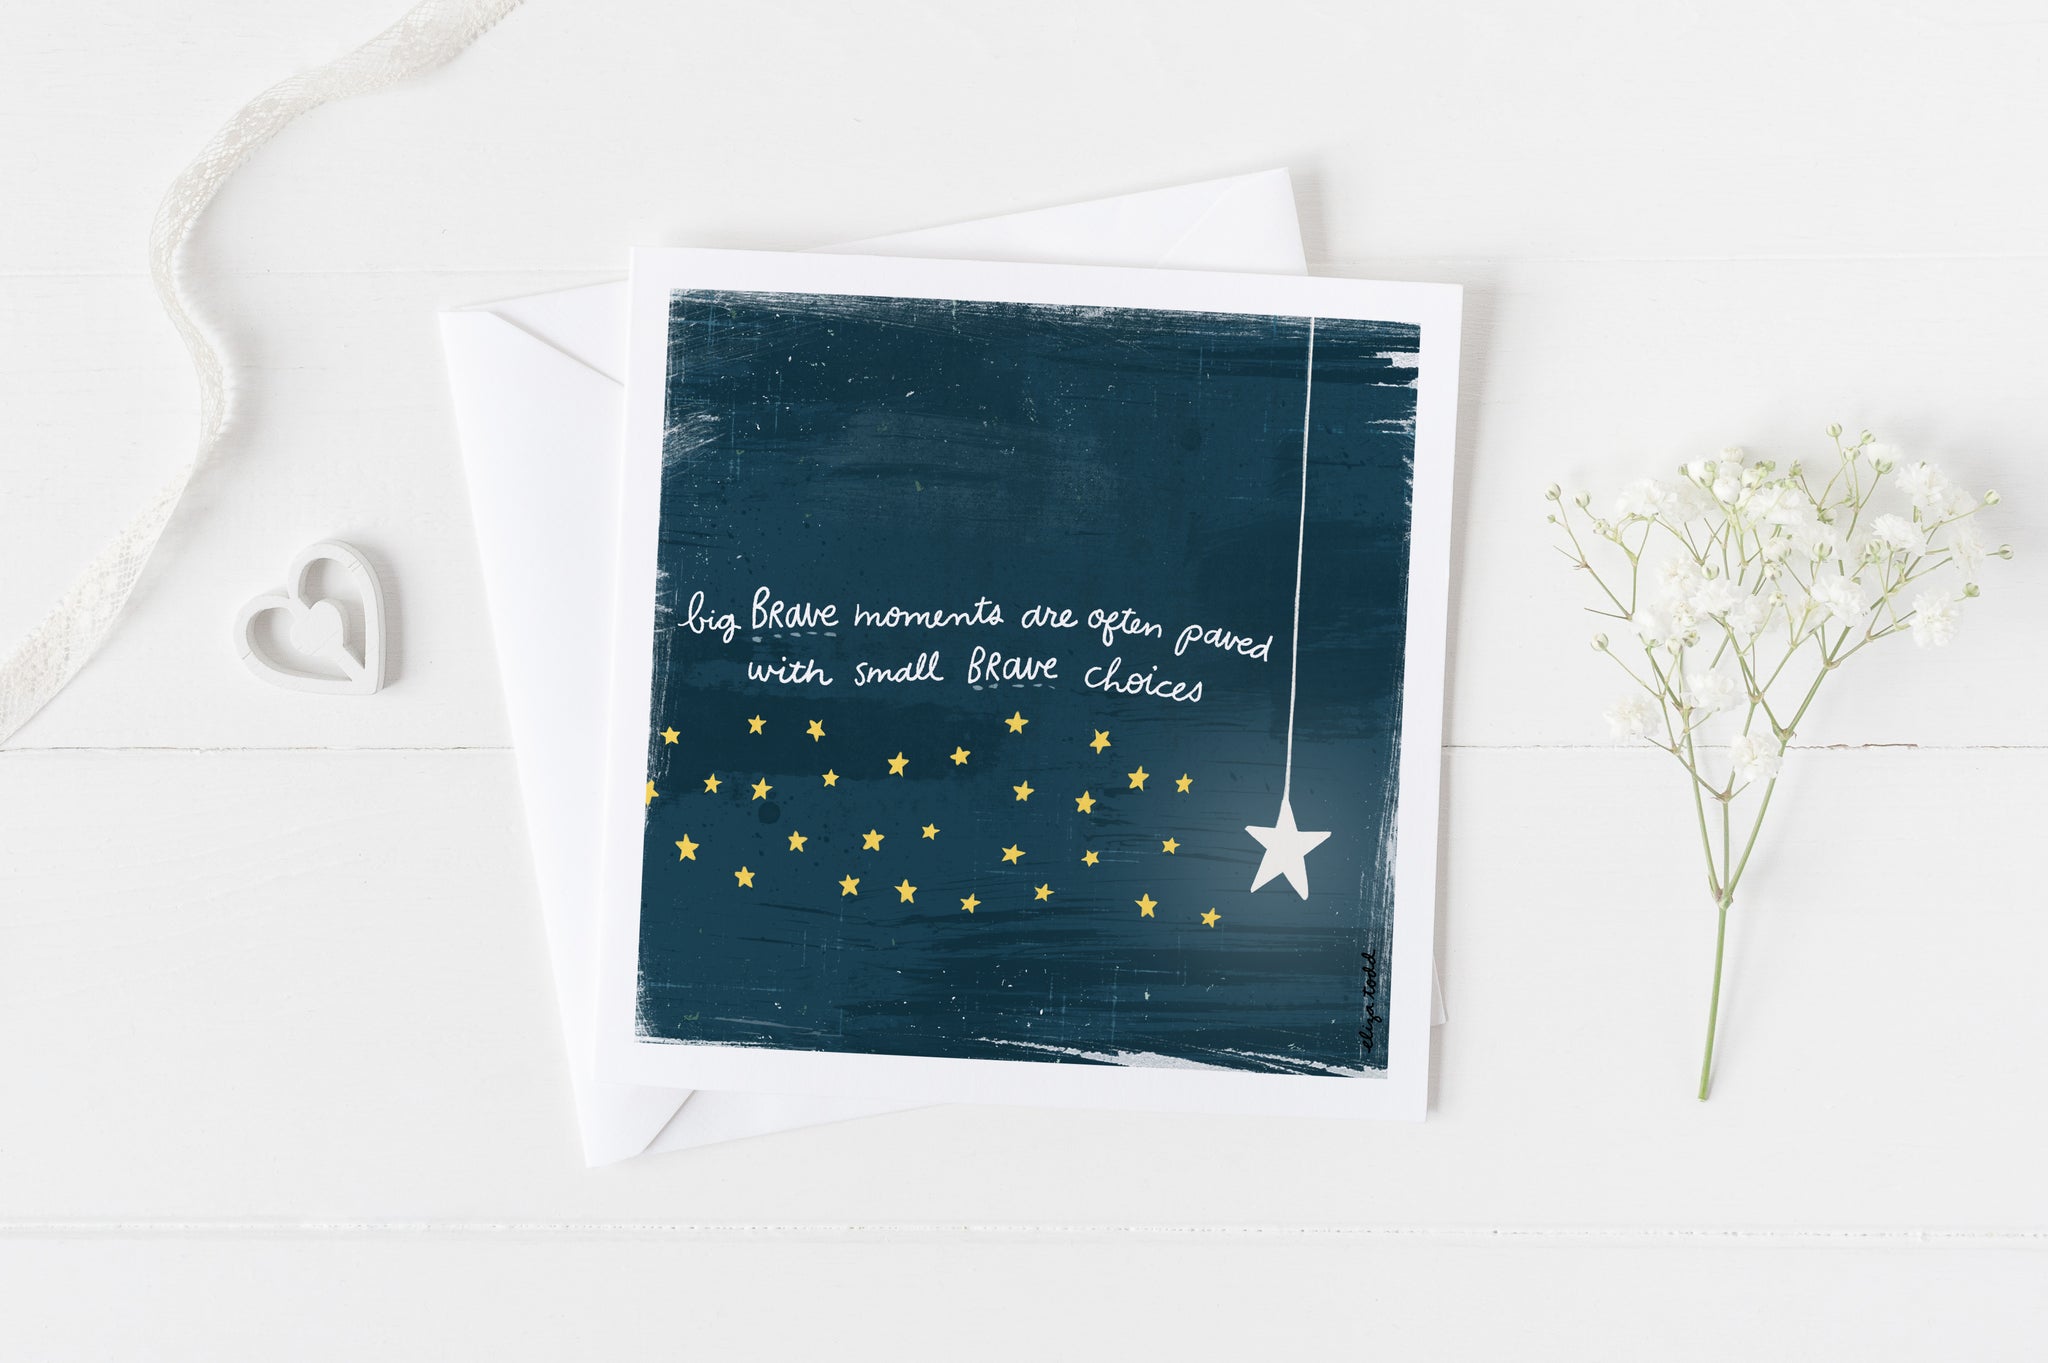 5x5 Greeting Card by Eliza Todd featuring a bright star and smaller stars saying "Big brave moments are often paved with small brave choices."